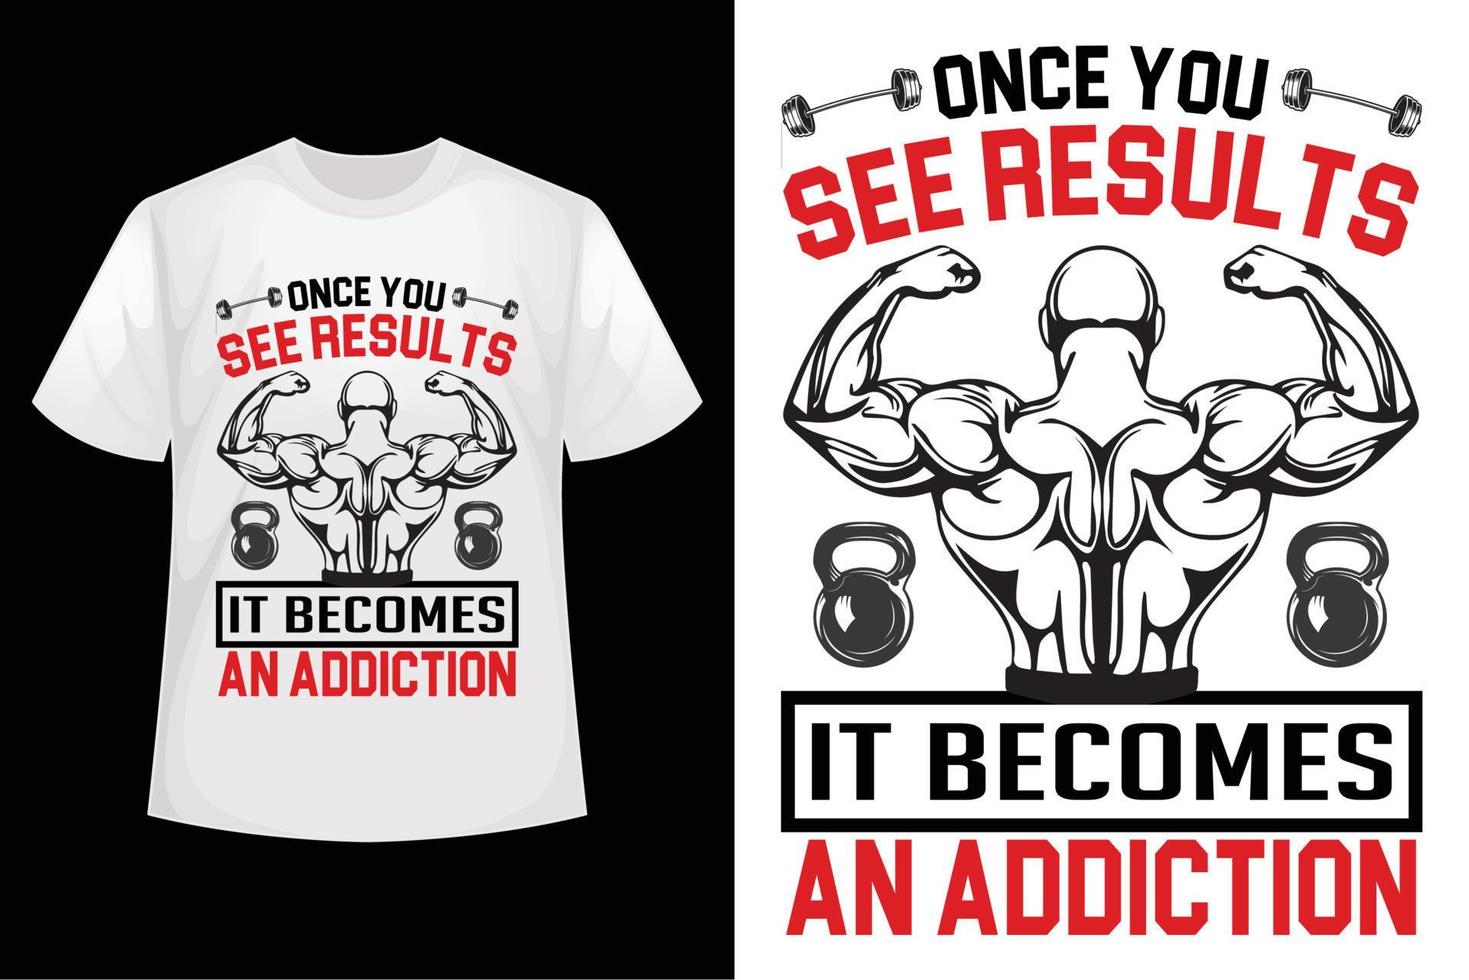 Once you see results It becomes an addiction - GYM t-shirt design template vector